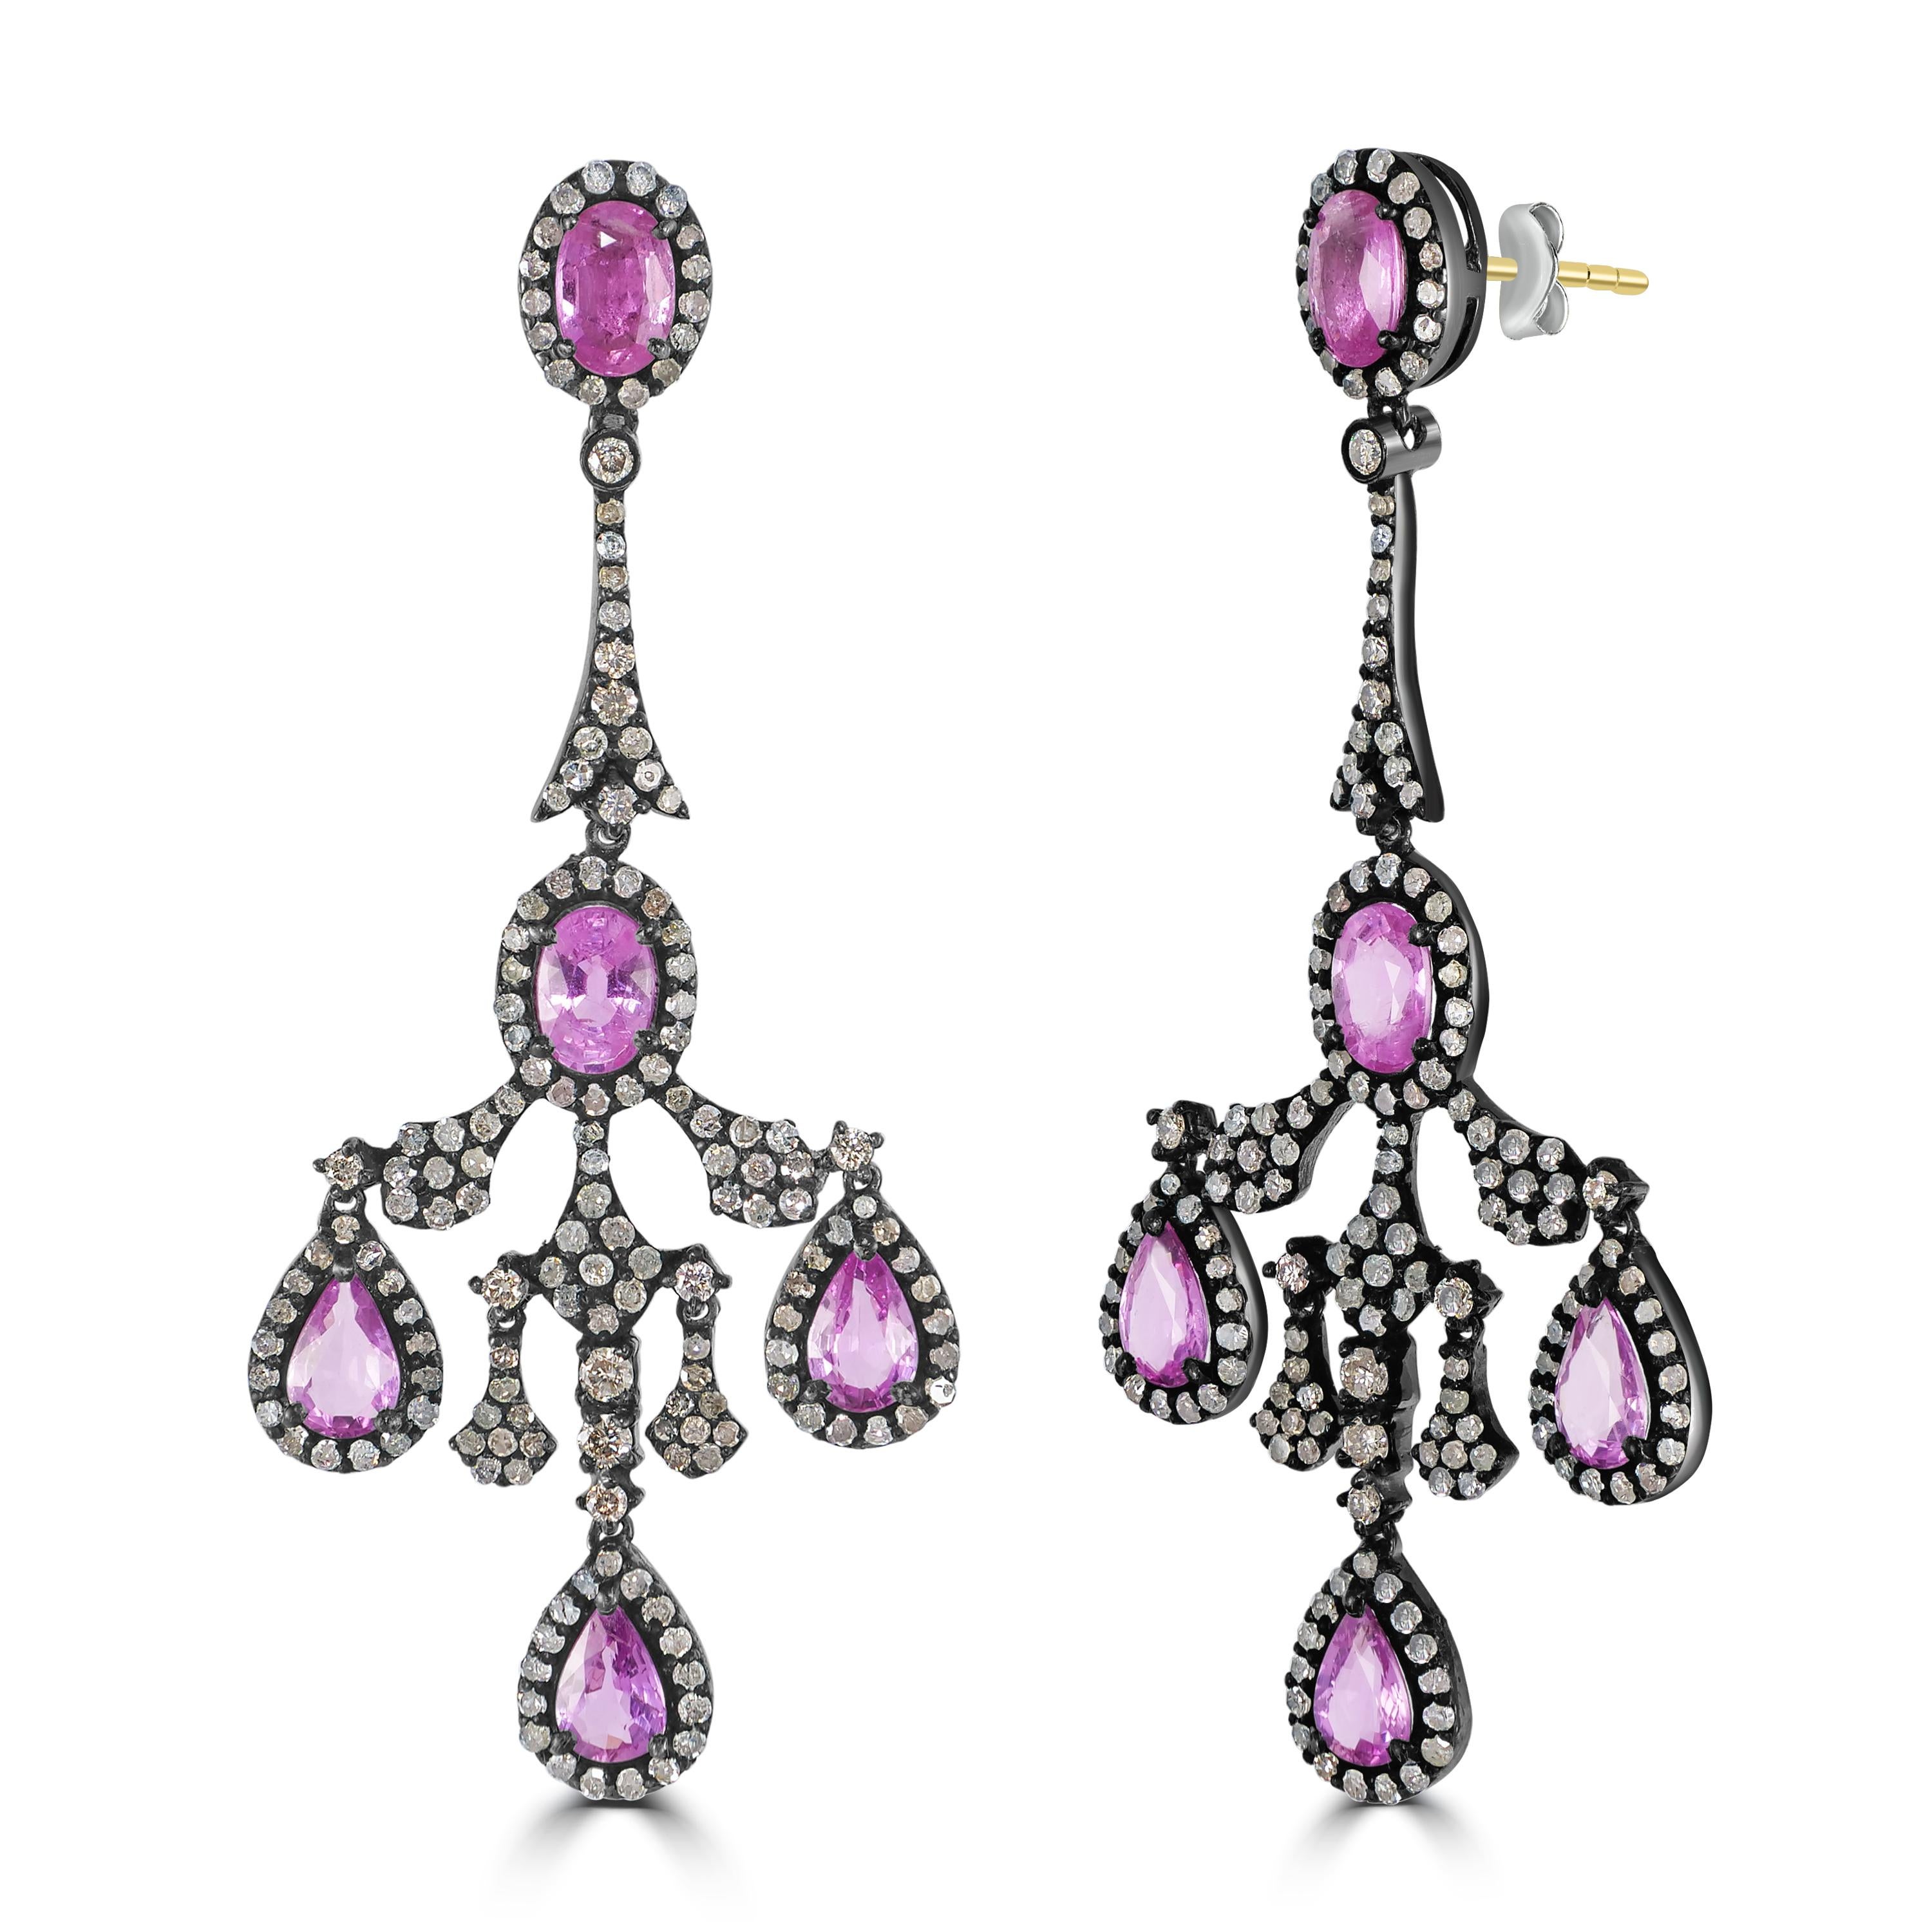 Drape yourself in the elegance of yesteryears with these Victorian 6.6 Cttw. Pink Sapphire and Diamond Chandelier Earrings. Each earring is a delicate confection of oval pink sapphires set in a diamond halo on a black rhodium surface, reminiscent of